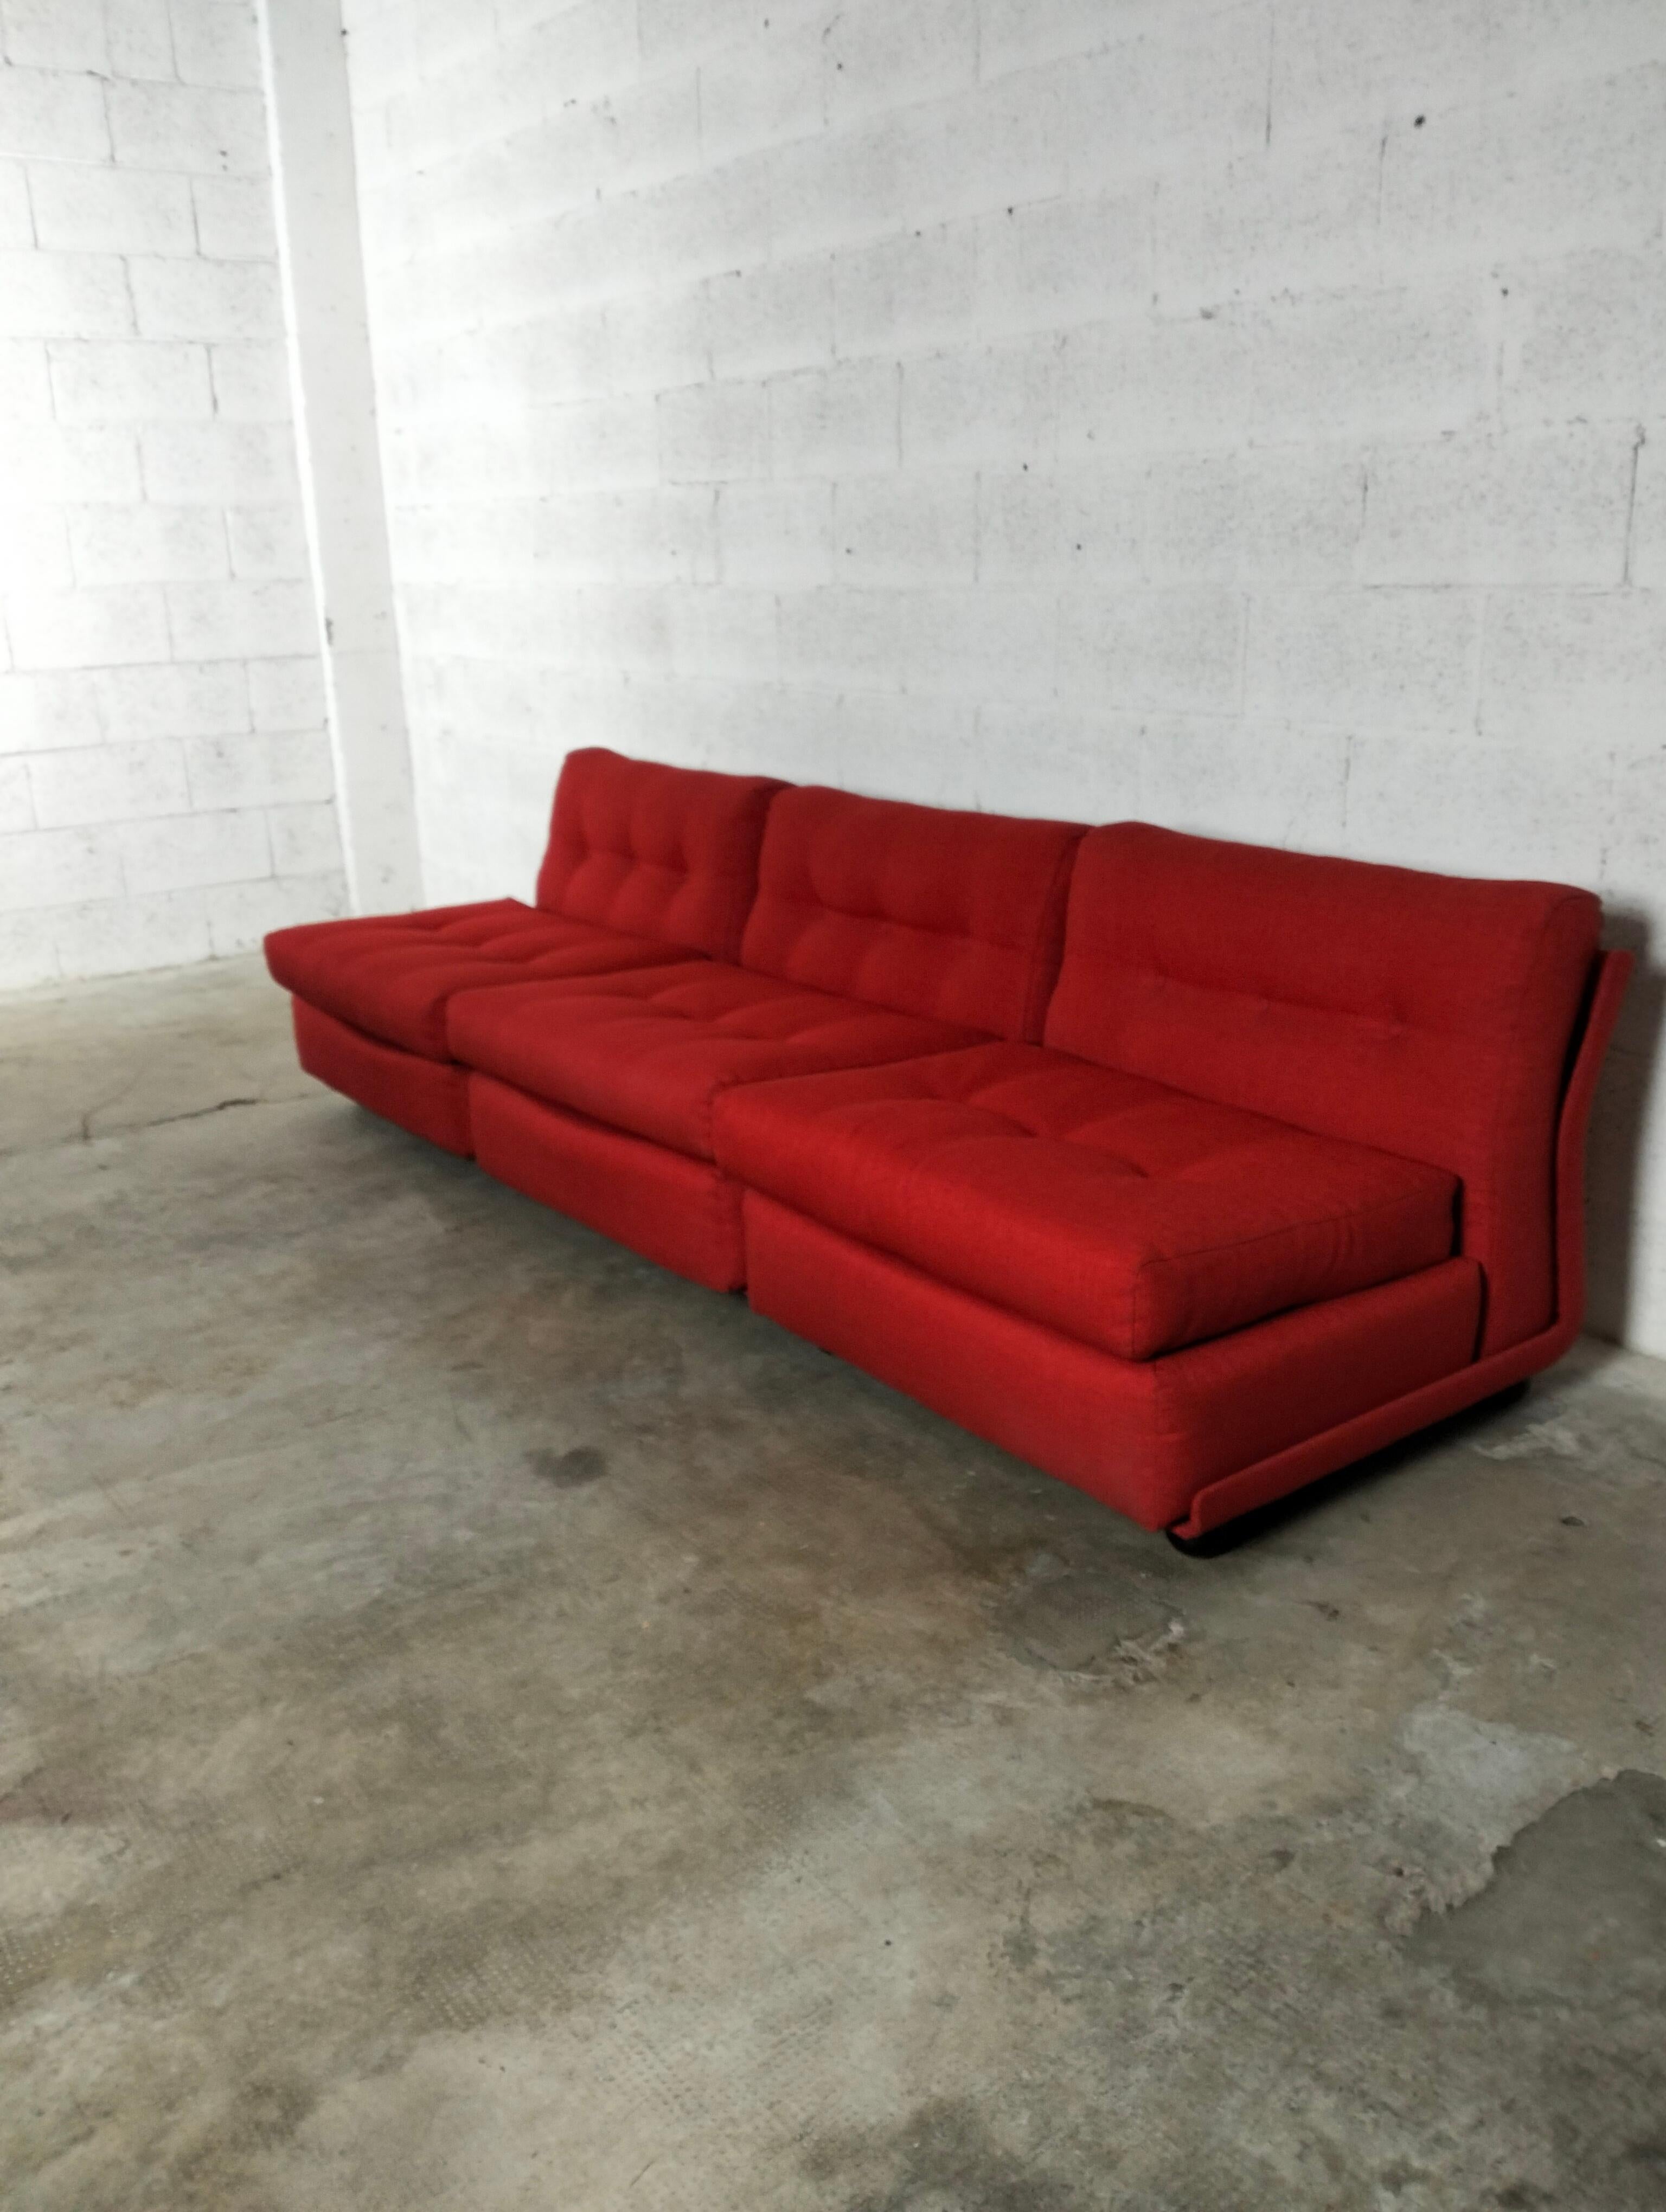 Set of 3 Red Amanta Lounge Chairs/Sofa by Mario Bellini for C&B Italia, 1970s In Good Condition For Sale In Padova, IT